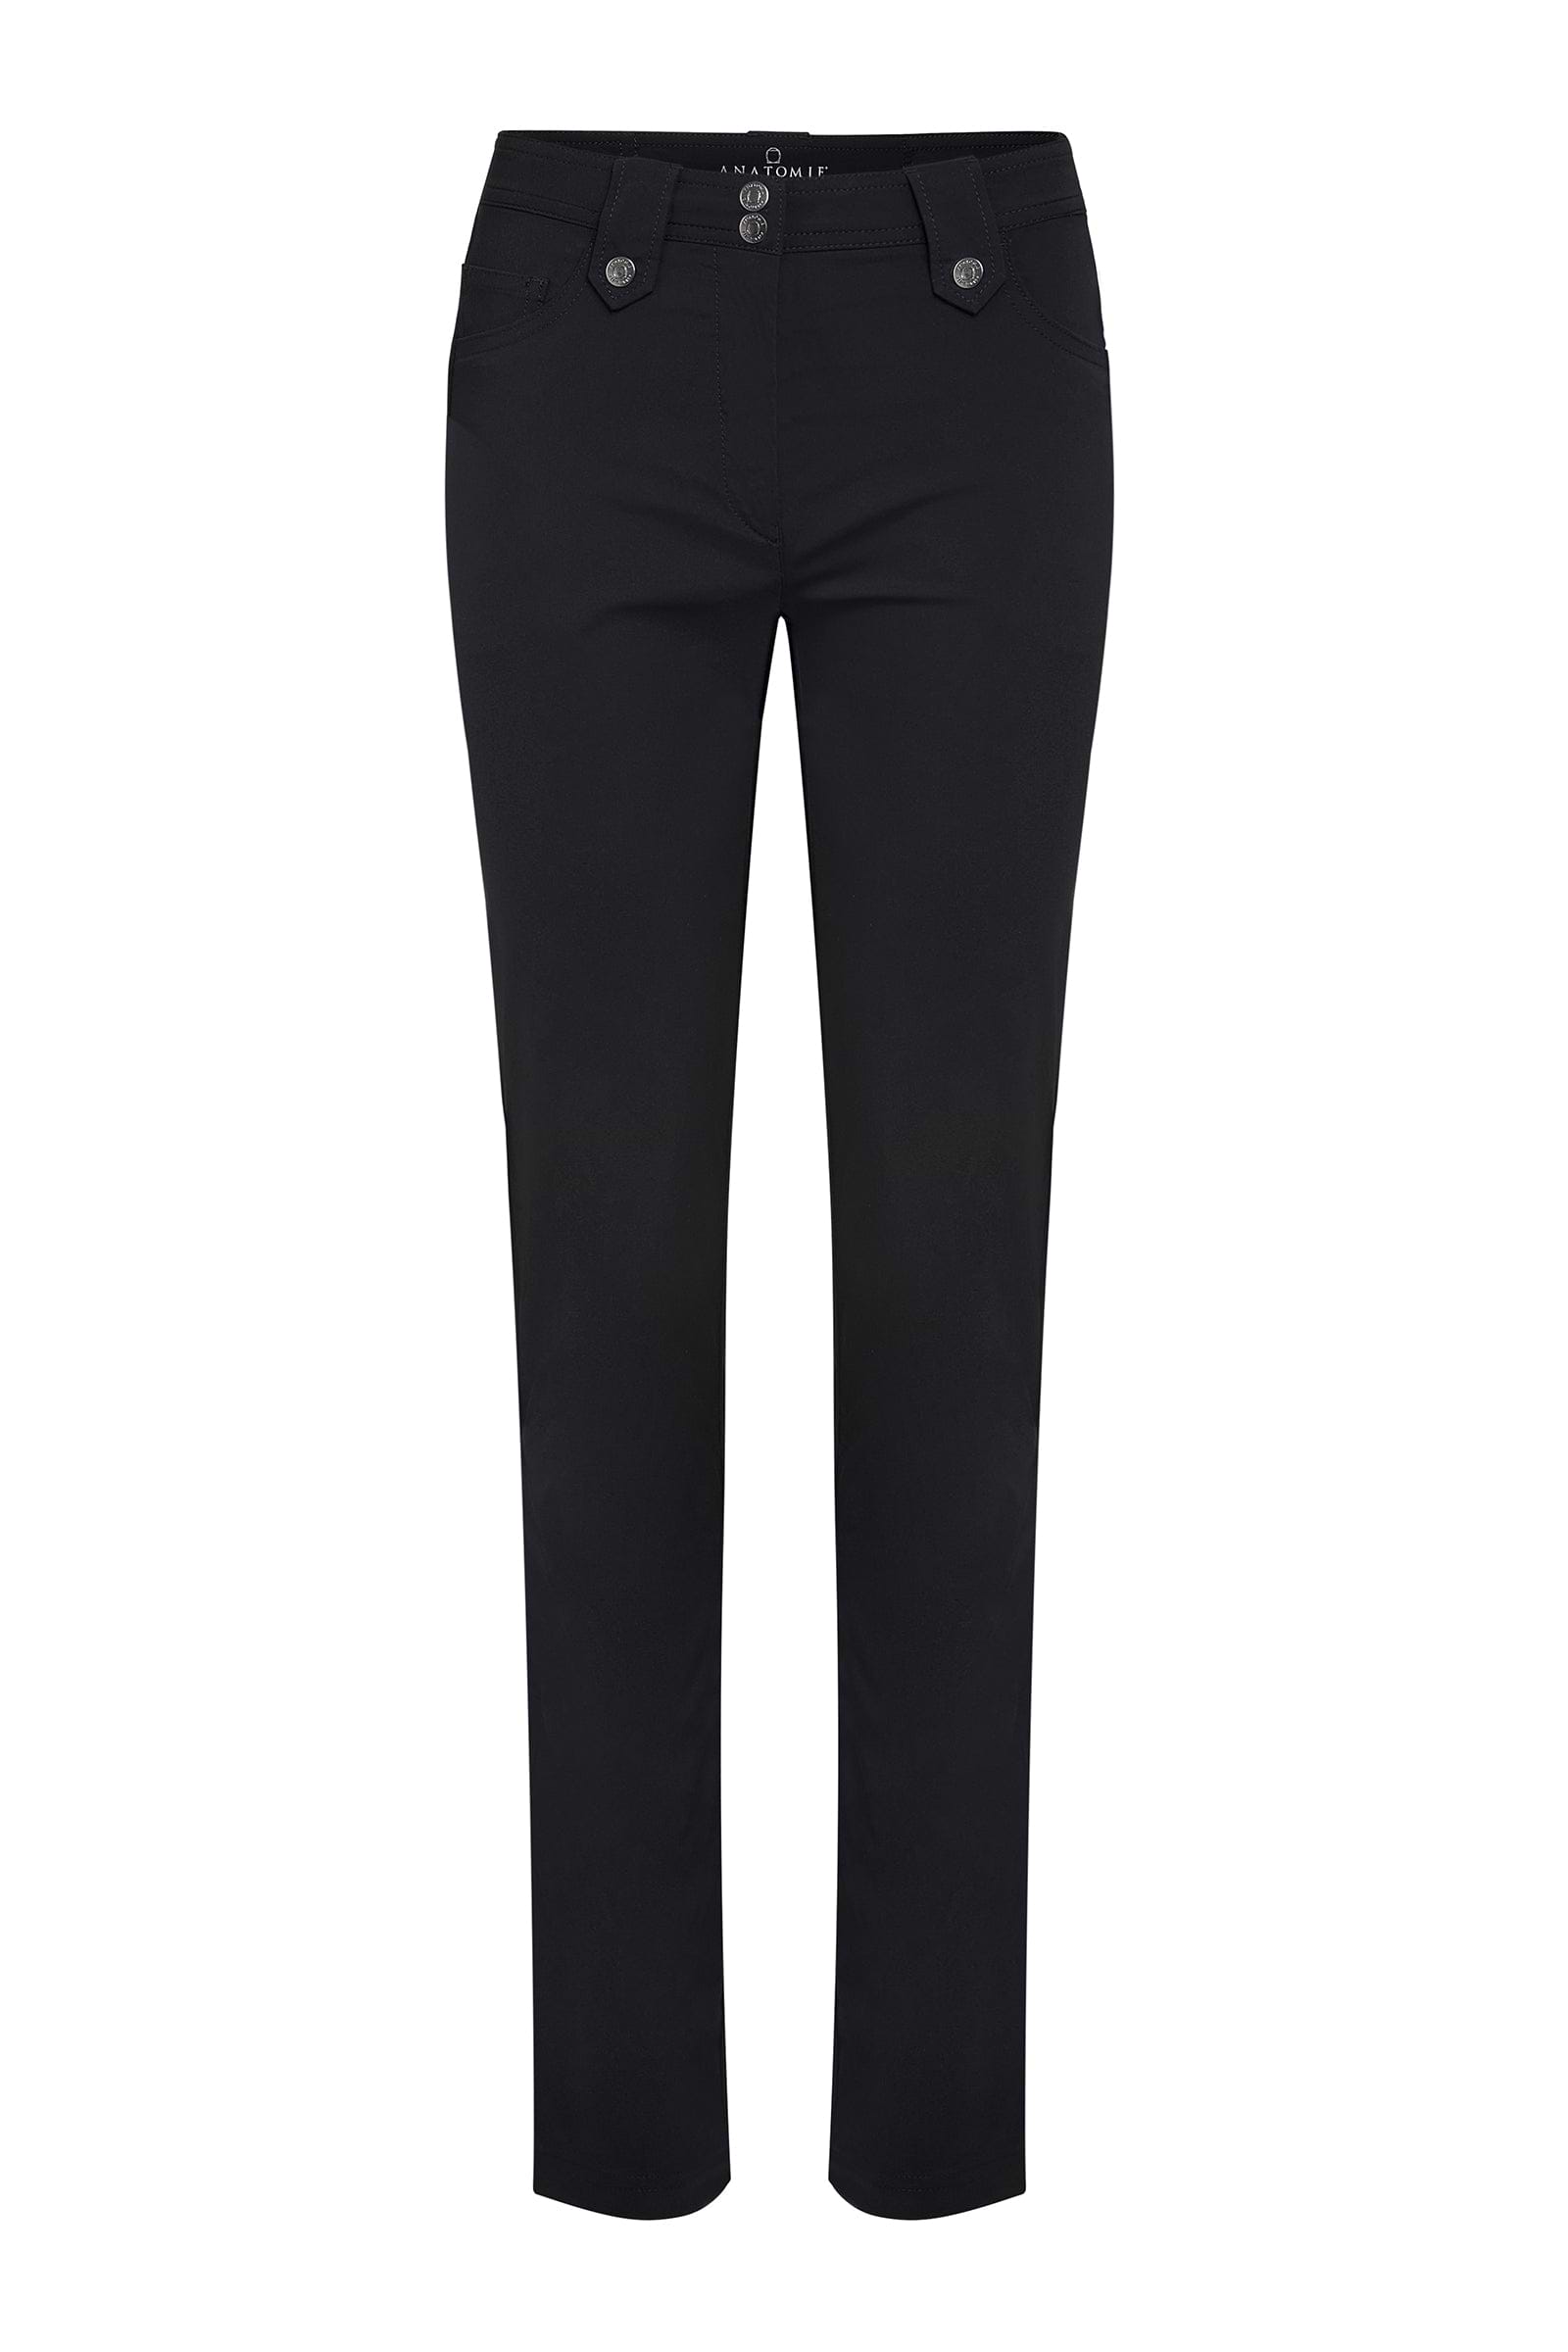 The Best Travel Pants. Flat Lay of the Skyler Travel Pant in Black